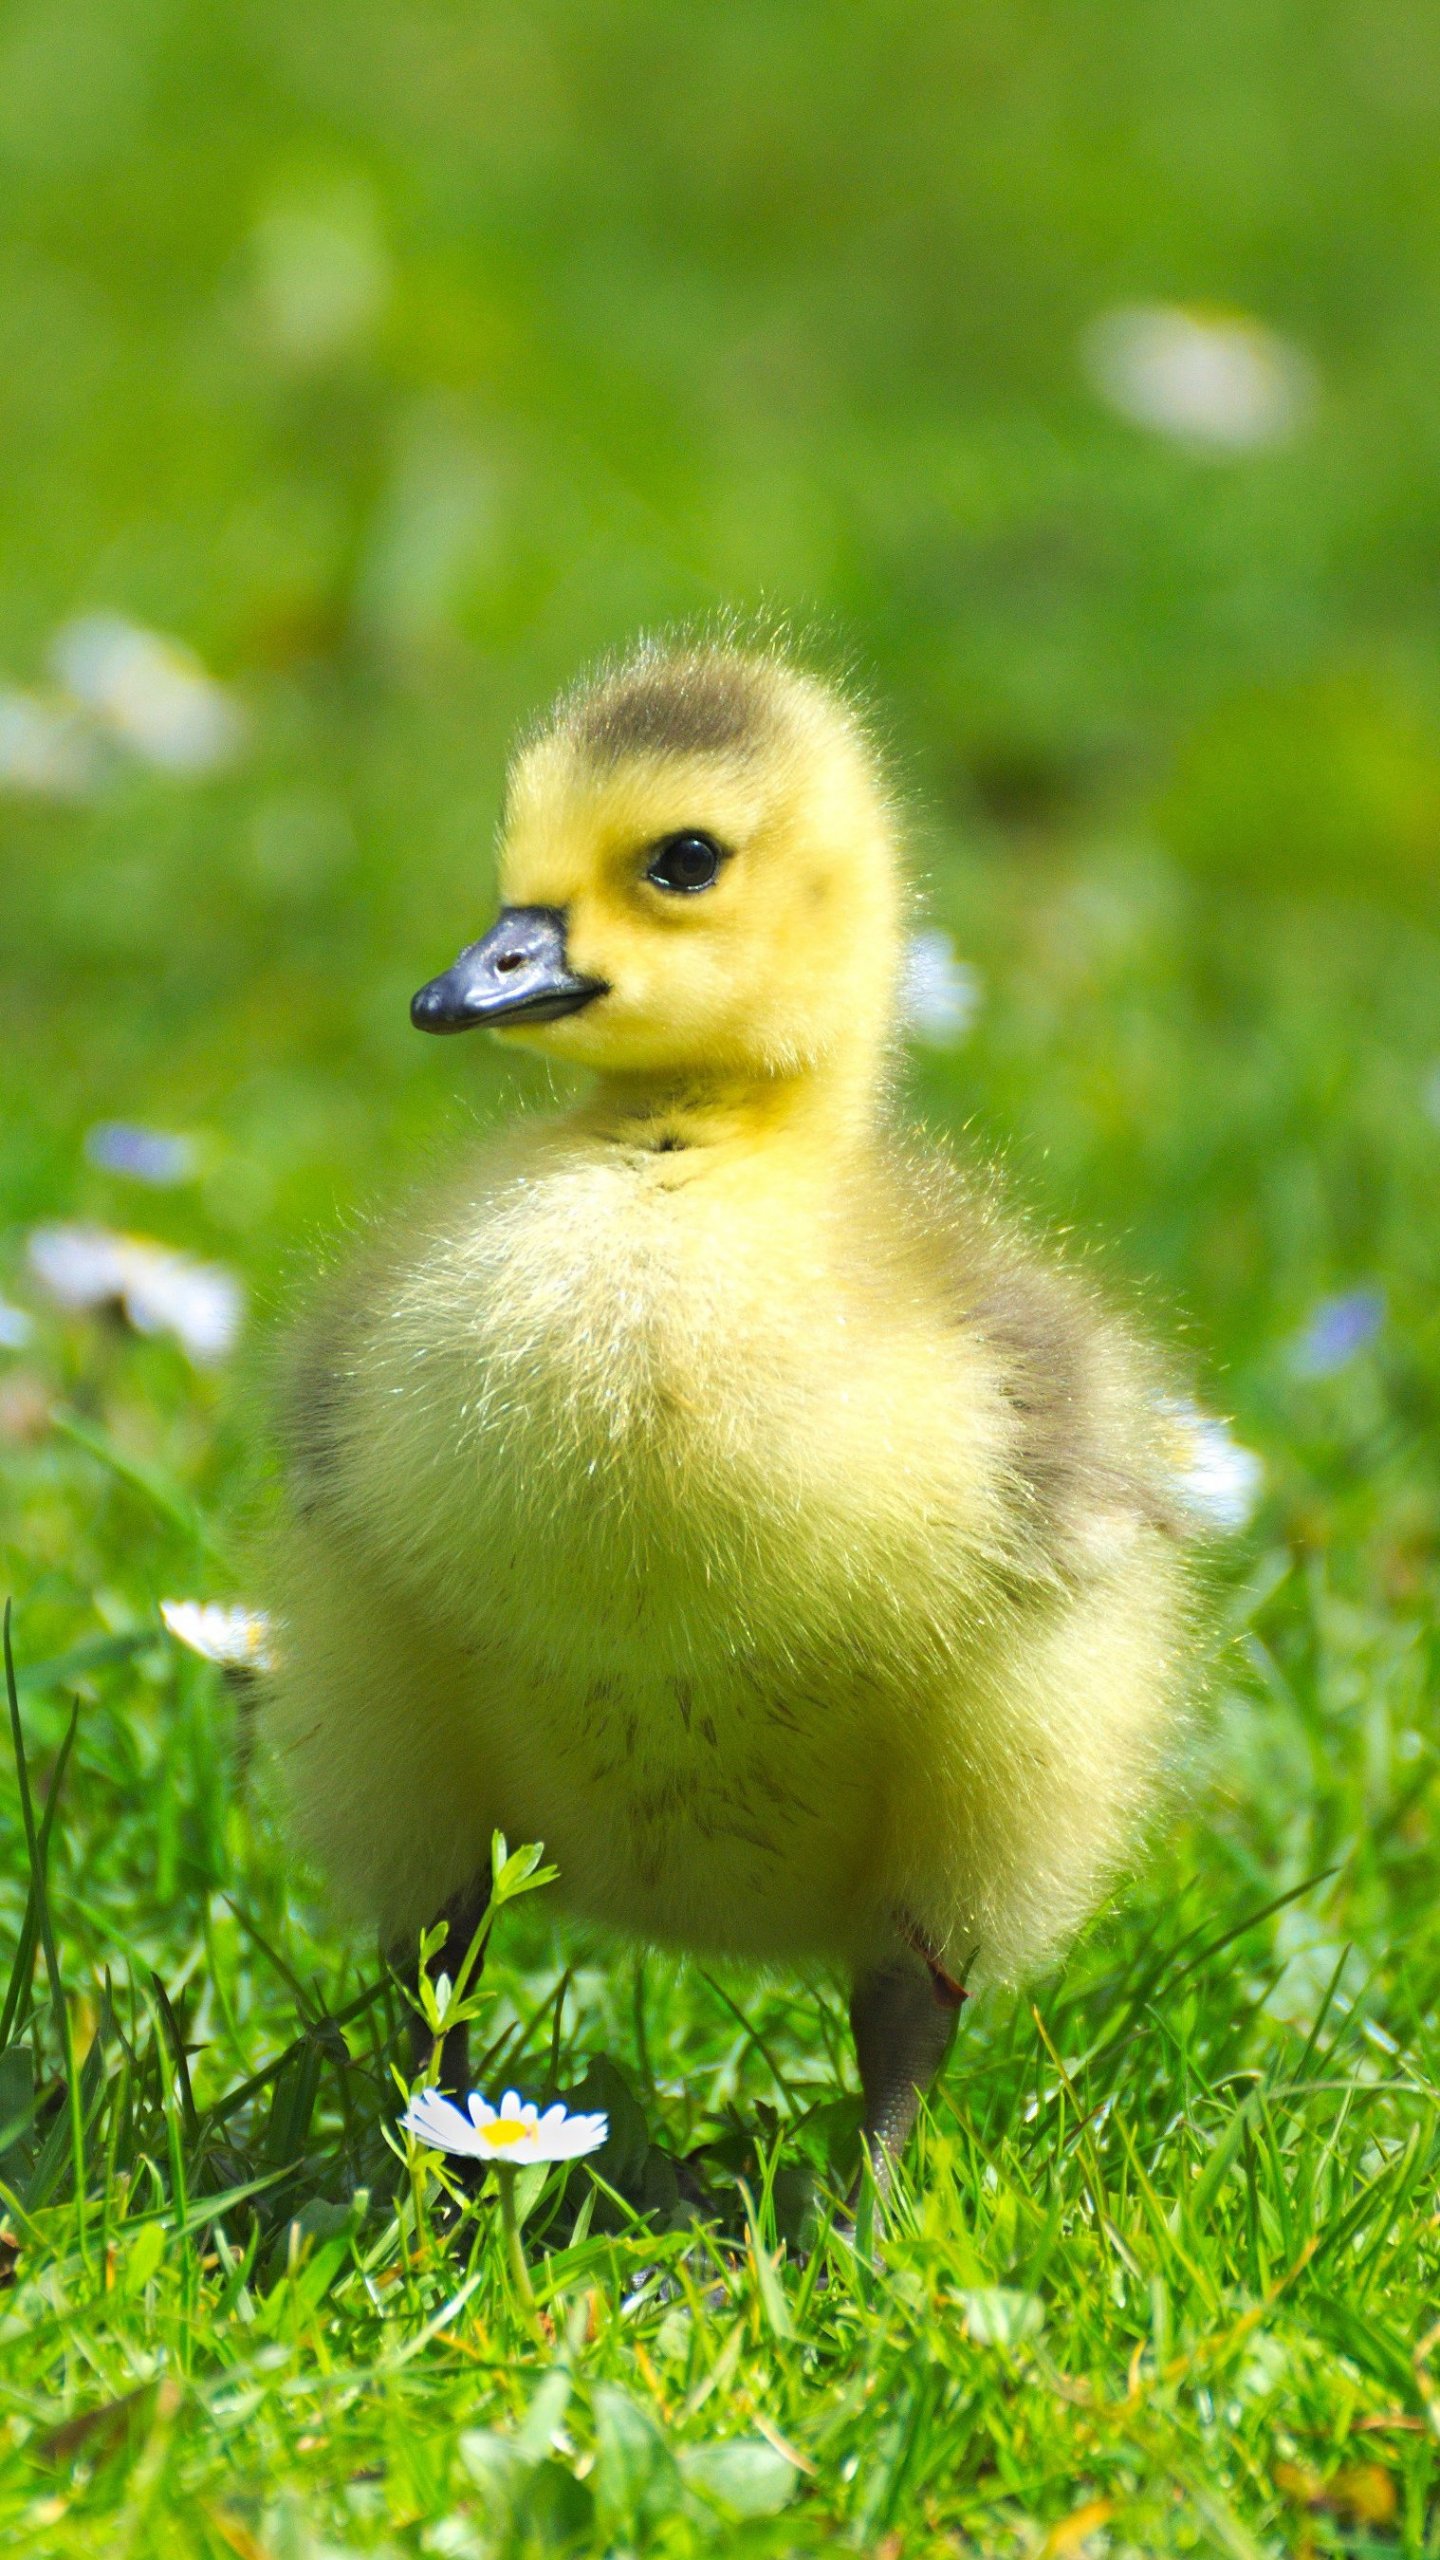 Fluffy Baby Goose Wallpaper - iPhone, Android & Desktop Backgrounds1440 x 2560